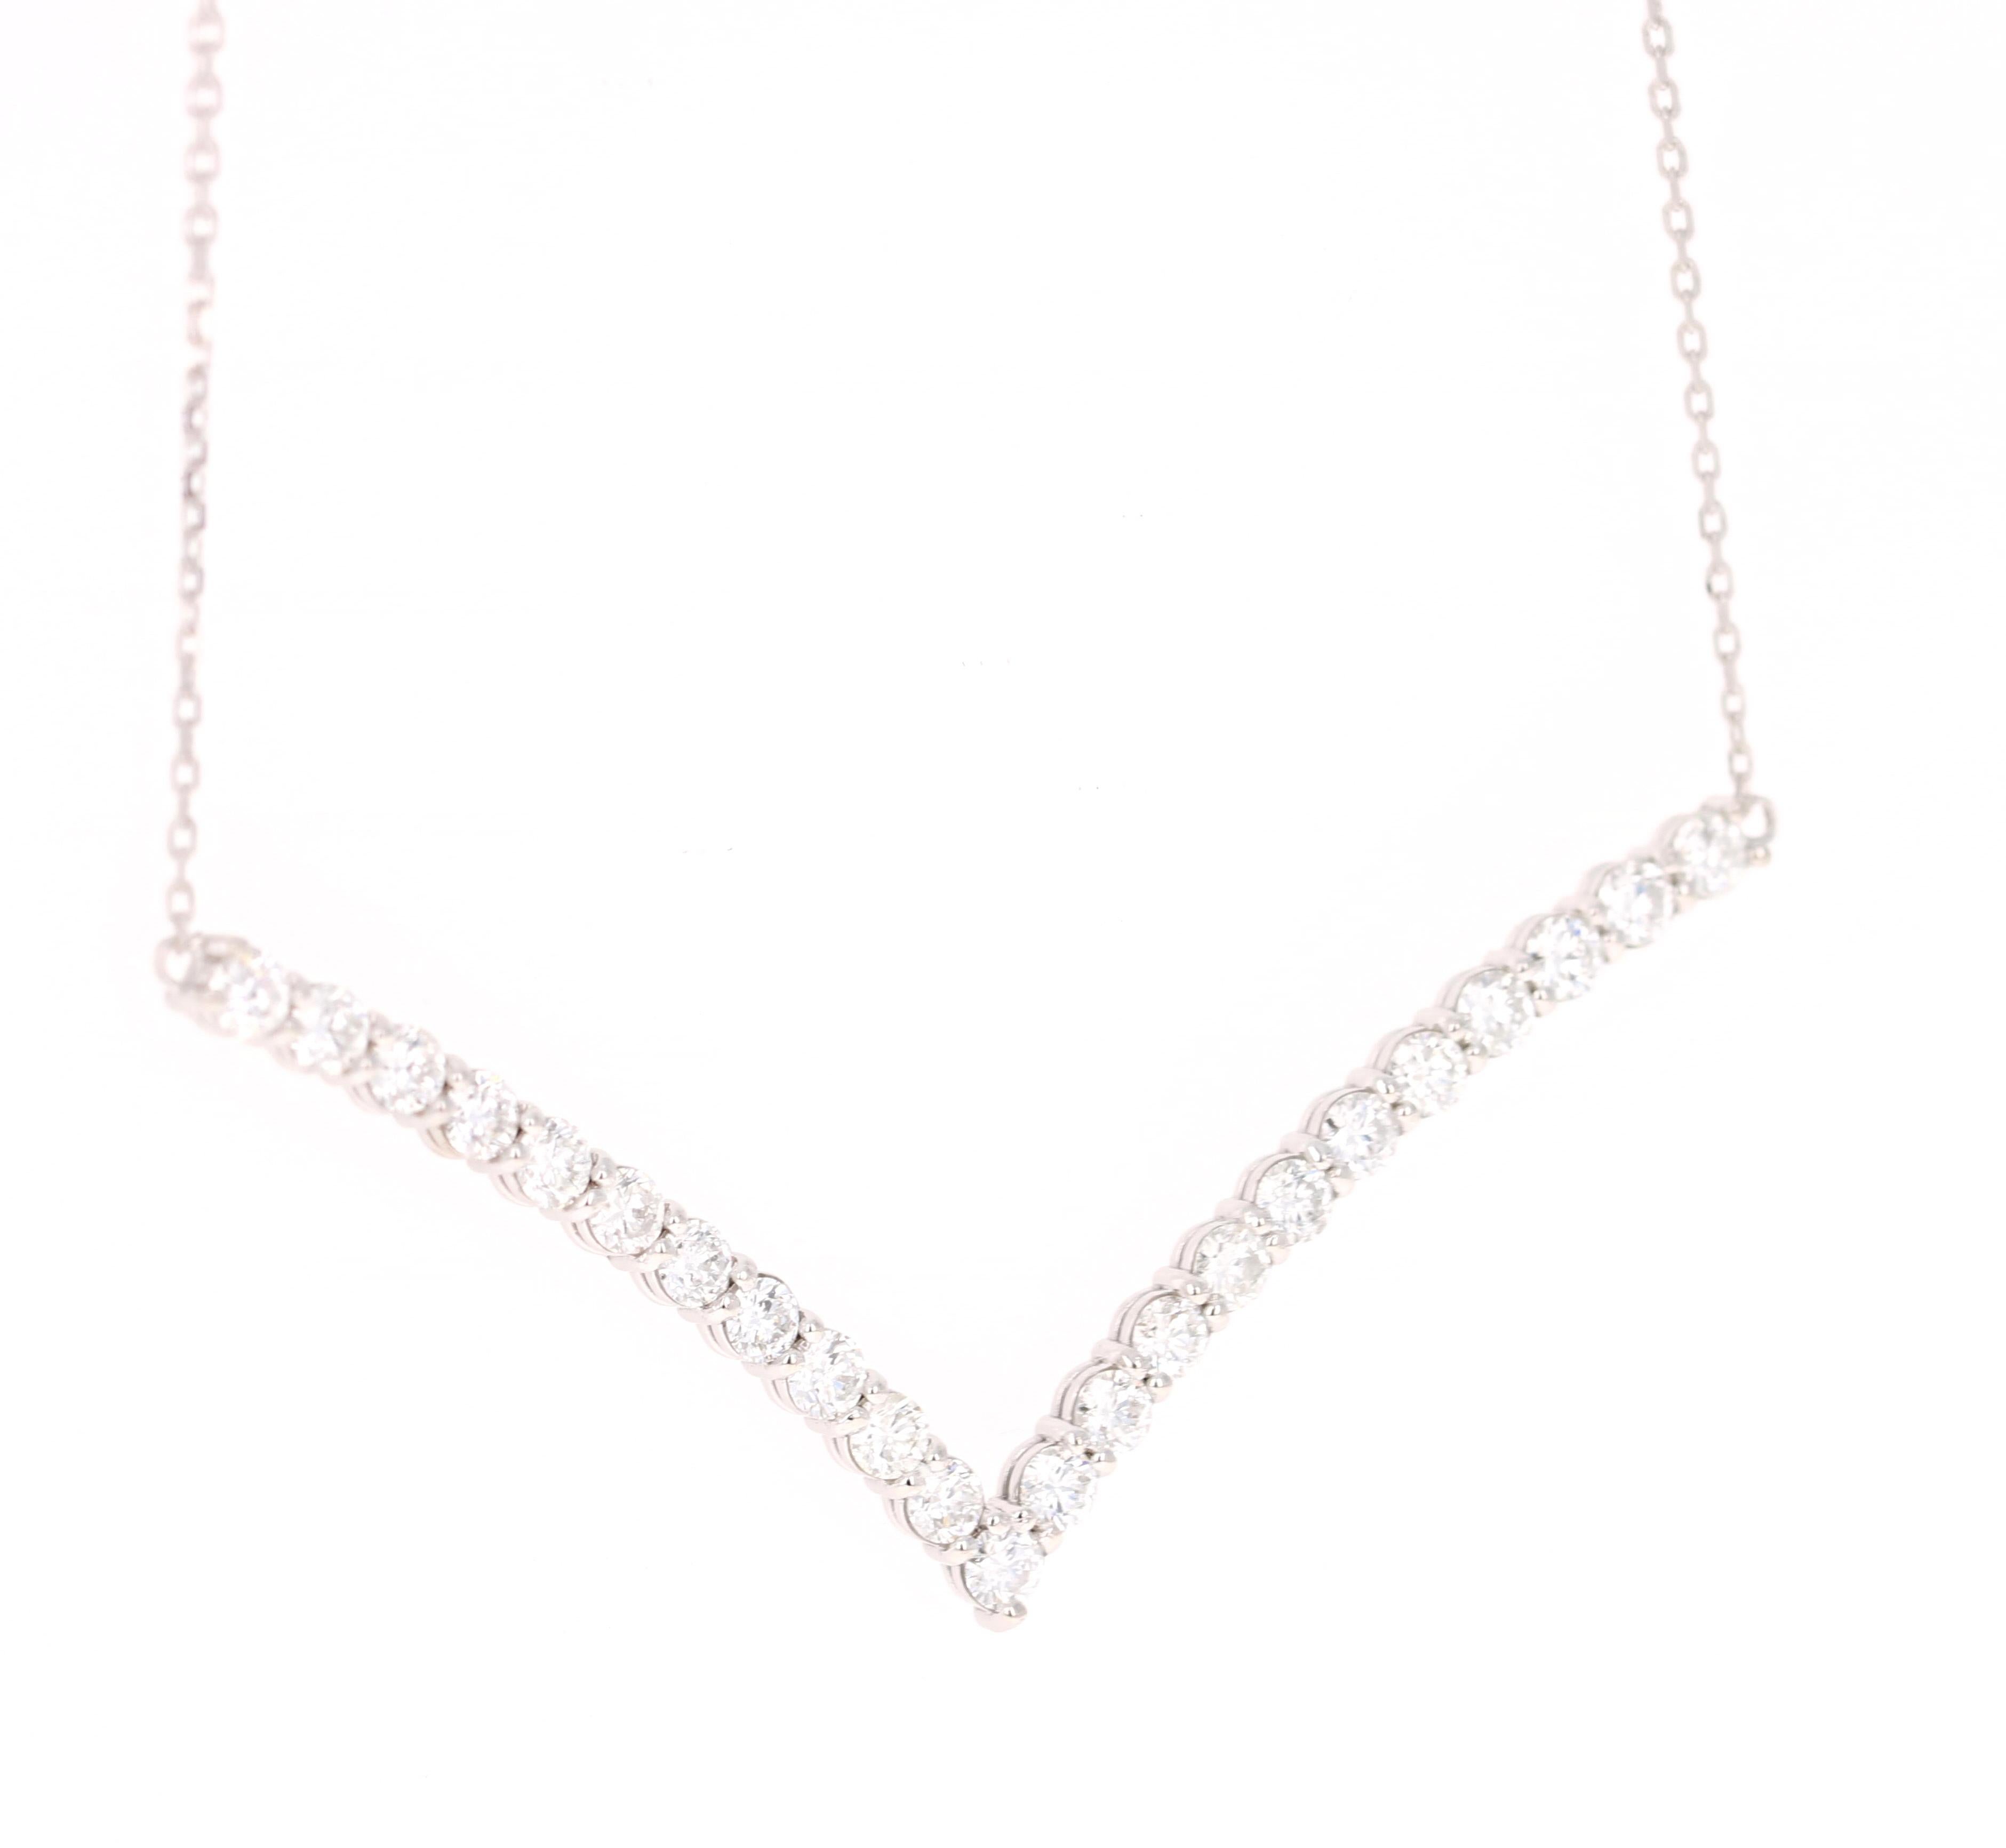 
 This Chain Necklace has a V-Shaped Necklace that has 23 Round Cut Diamonds (Clarity: SI, Color: F) that weigh 2.03 Carats. The Clarity and Color of the diamonds are SI-F. 

It is beautifully curated in 14 Karat White Gold and weighs 3.2 grams. The